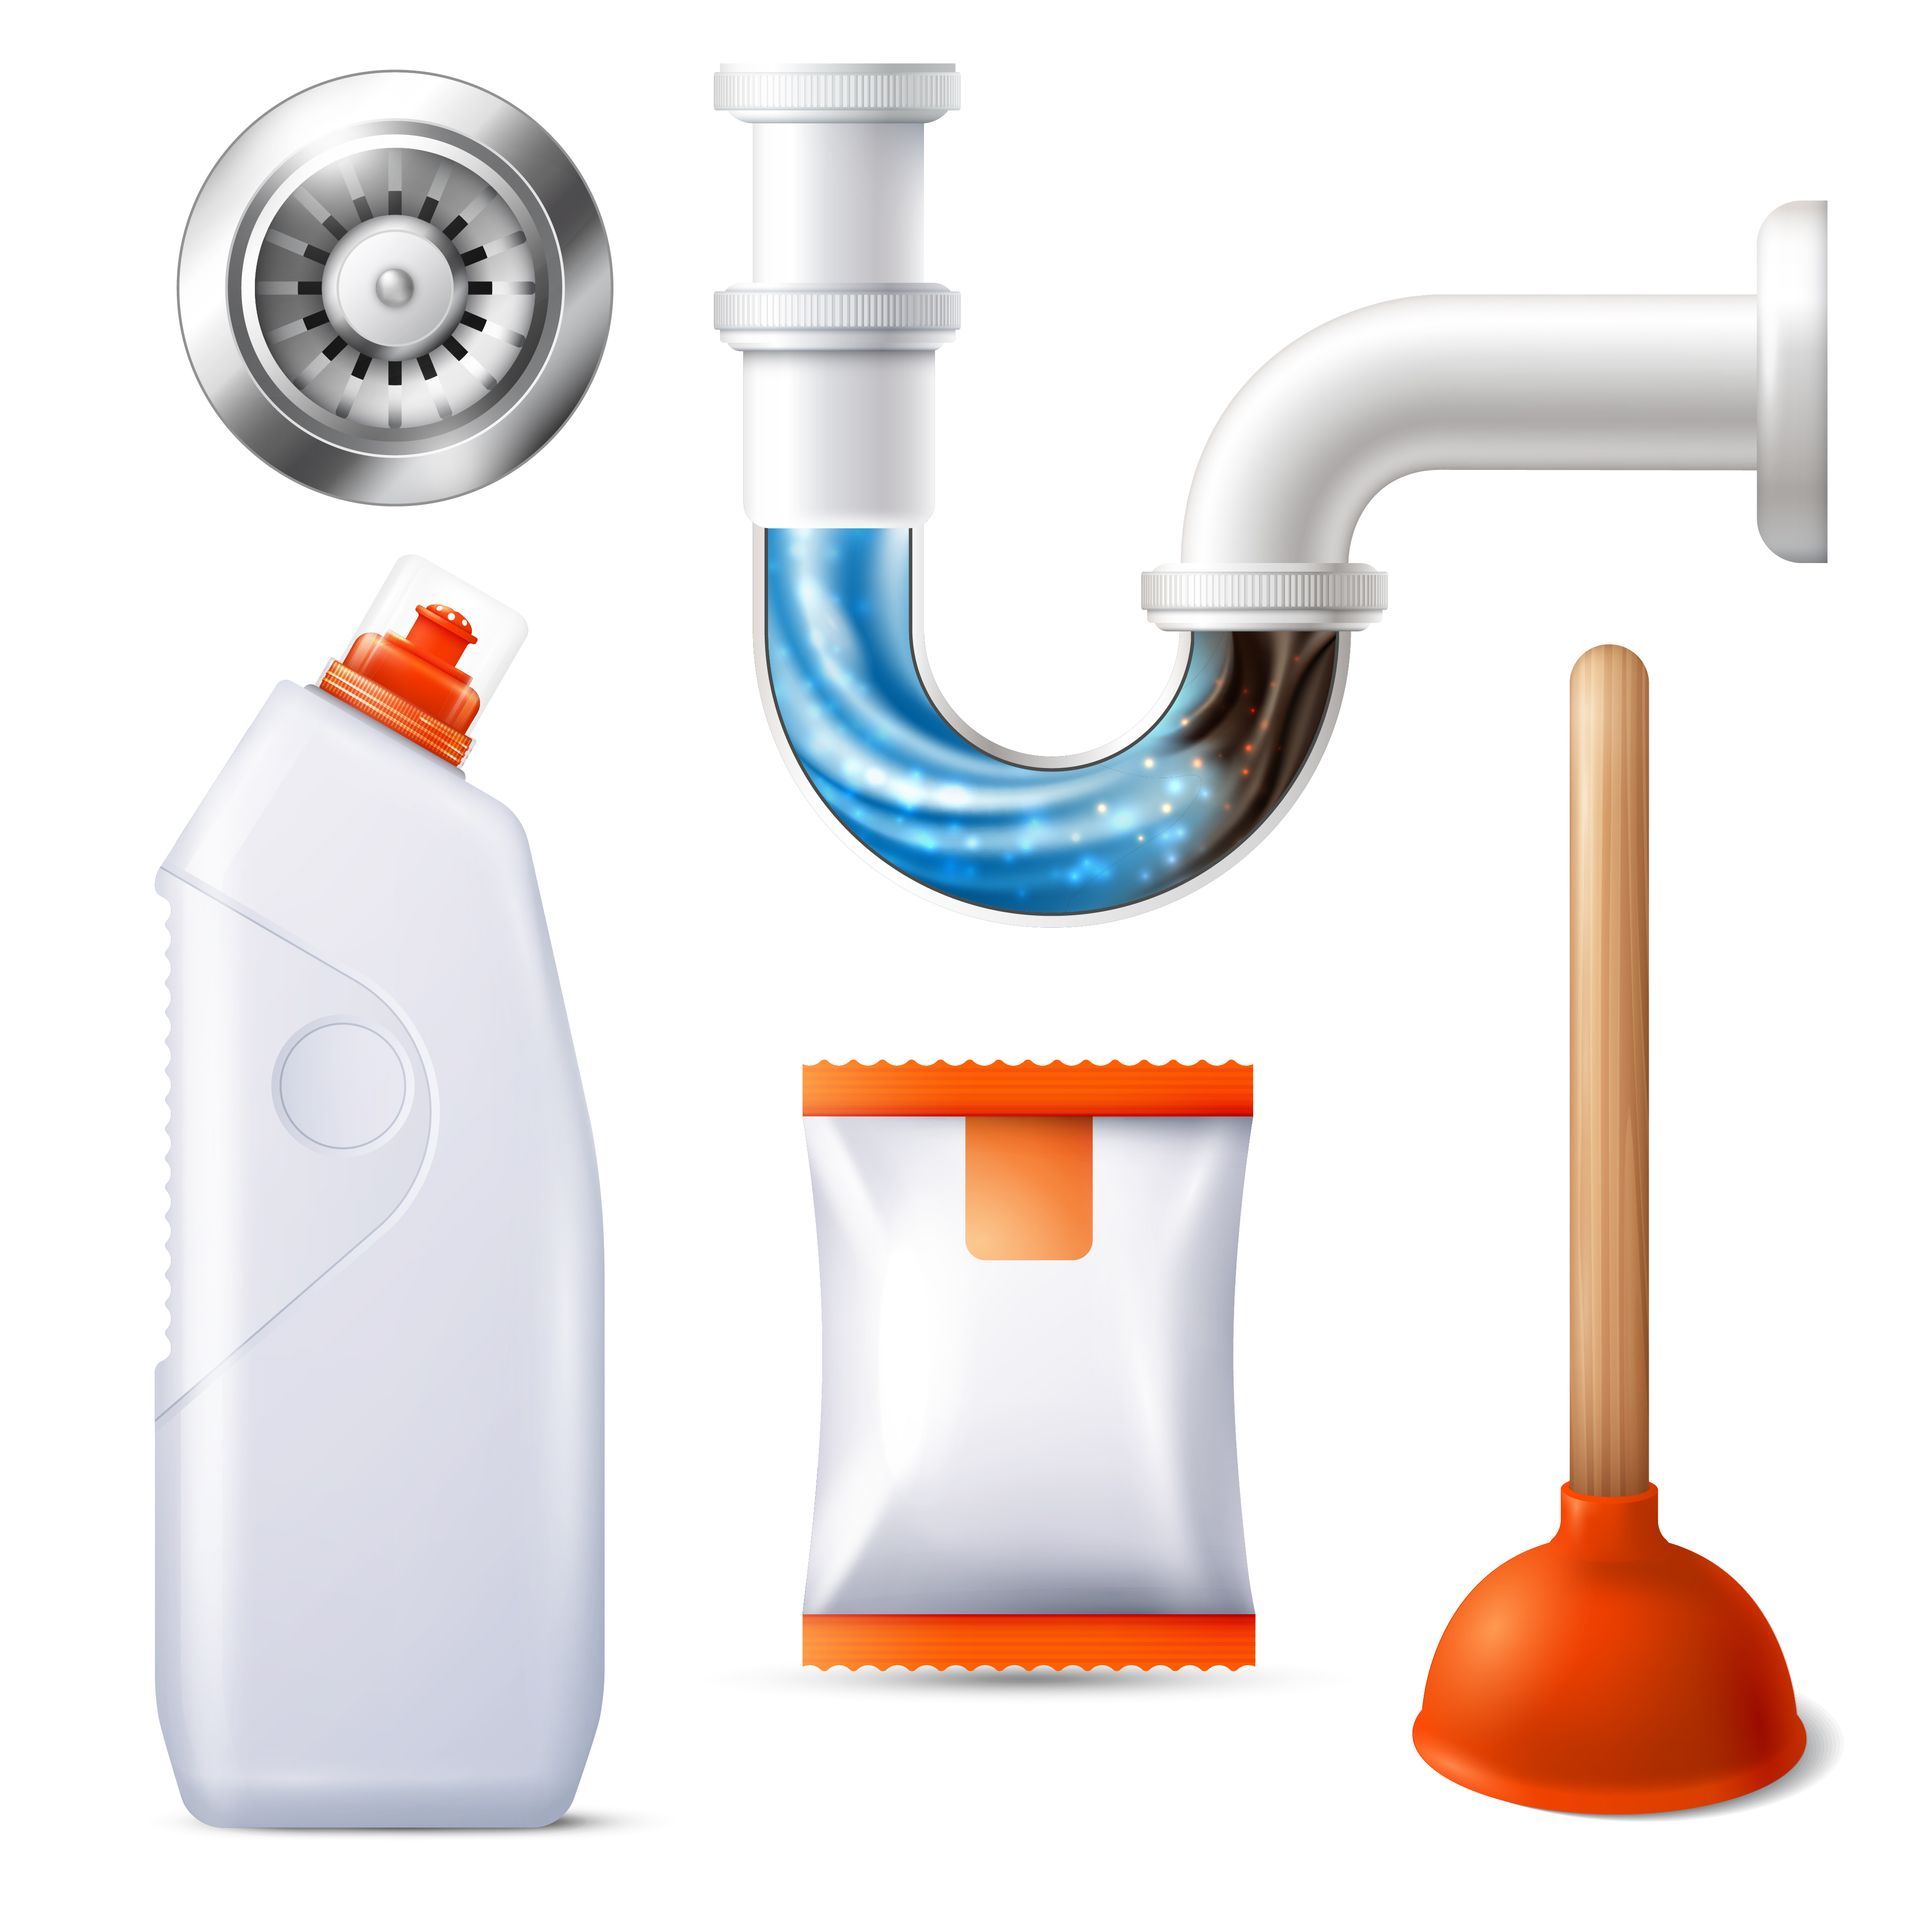 A bottle of toilet cleaner , a plunger , a bag of drain cleaner , and a pipe.